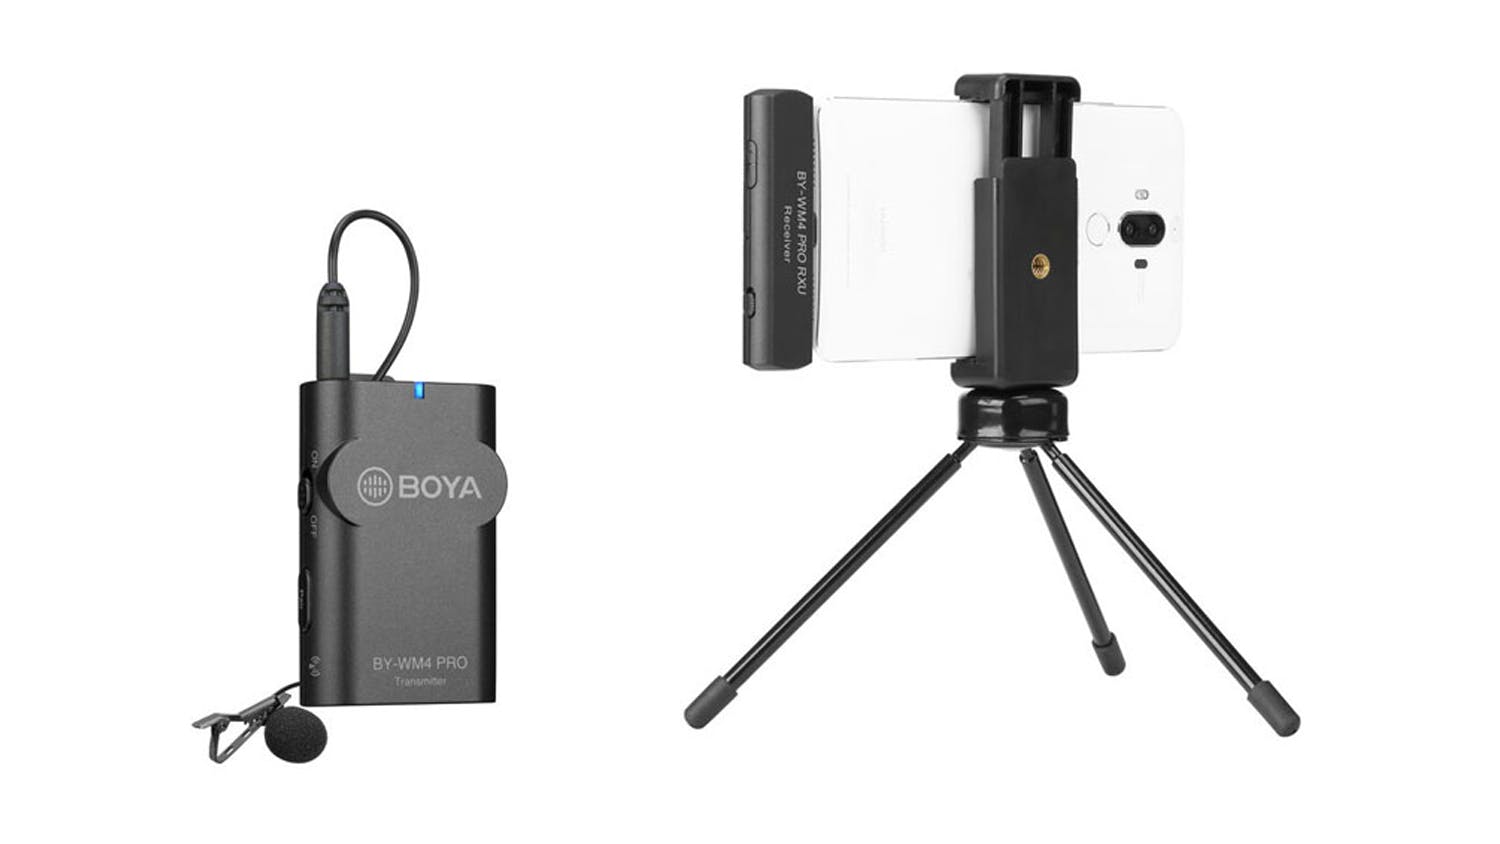 Boya 2.4 GHz Wireless Microphone System for Android Devices